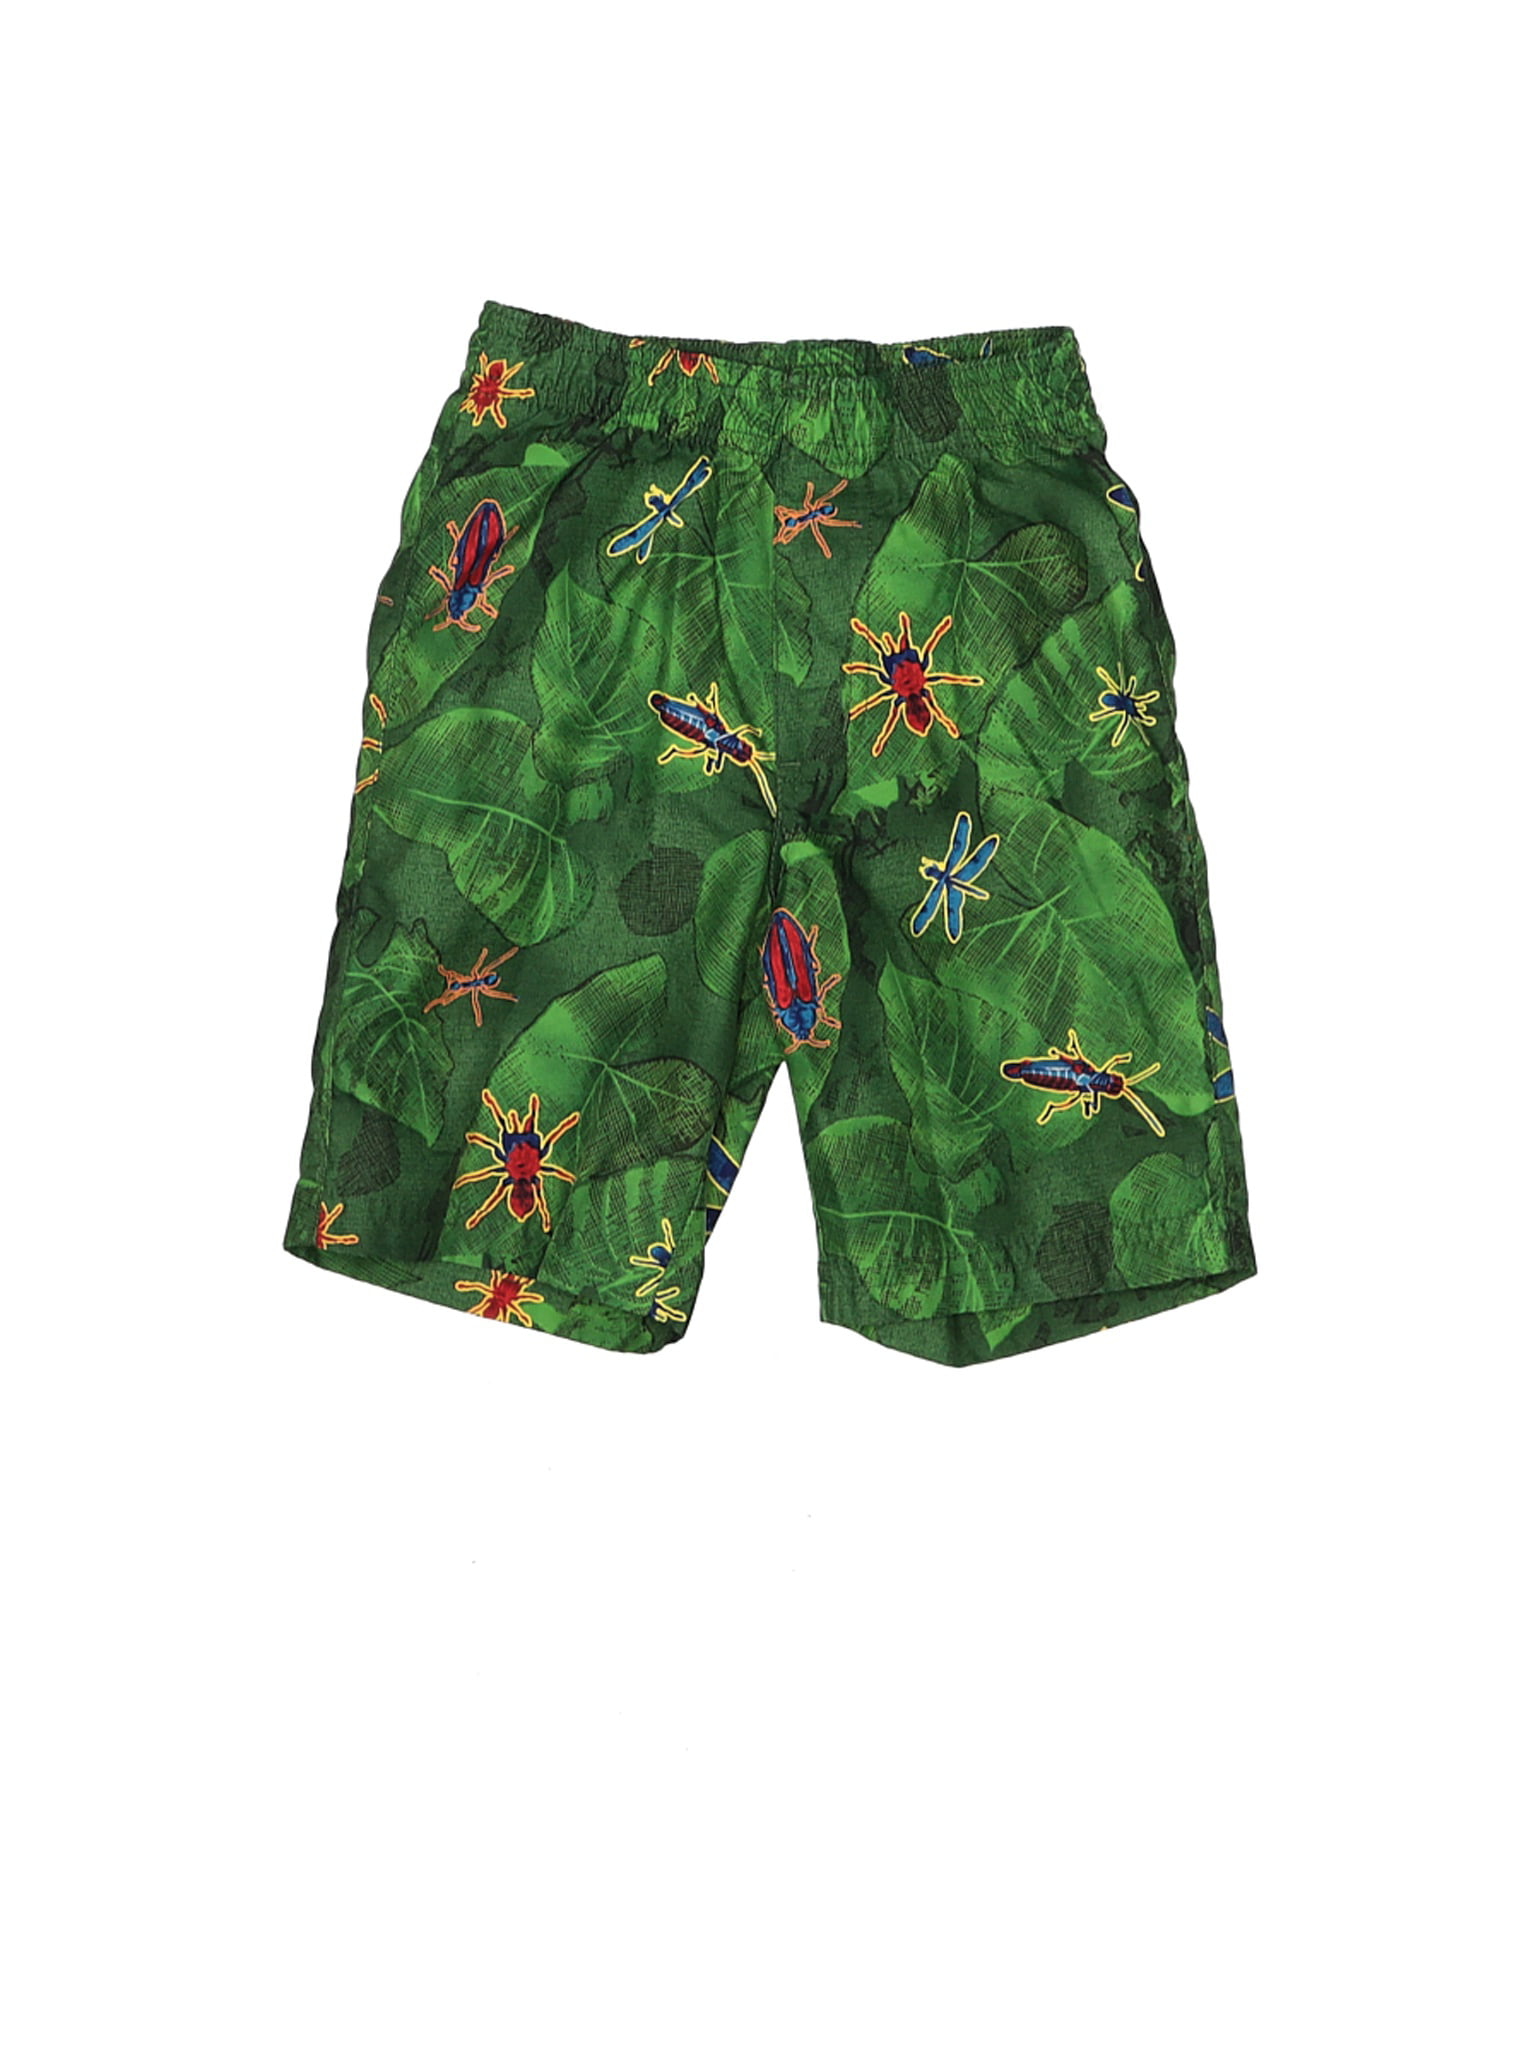 Boys Board Shorts Frogs On Leaves Green Quick Dry Swim Surf Trunks